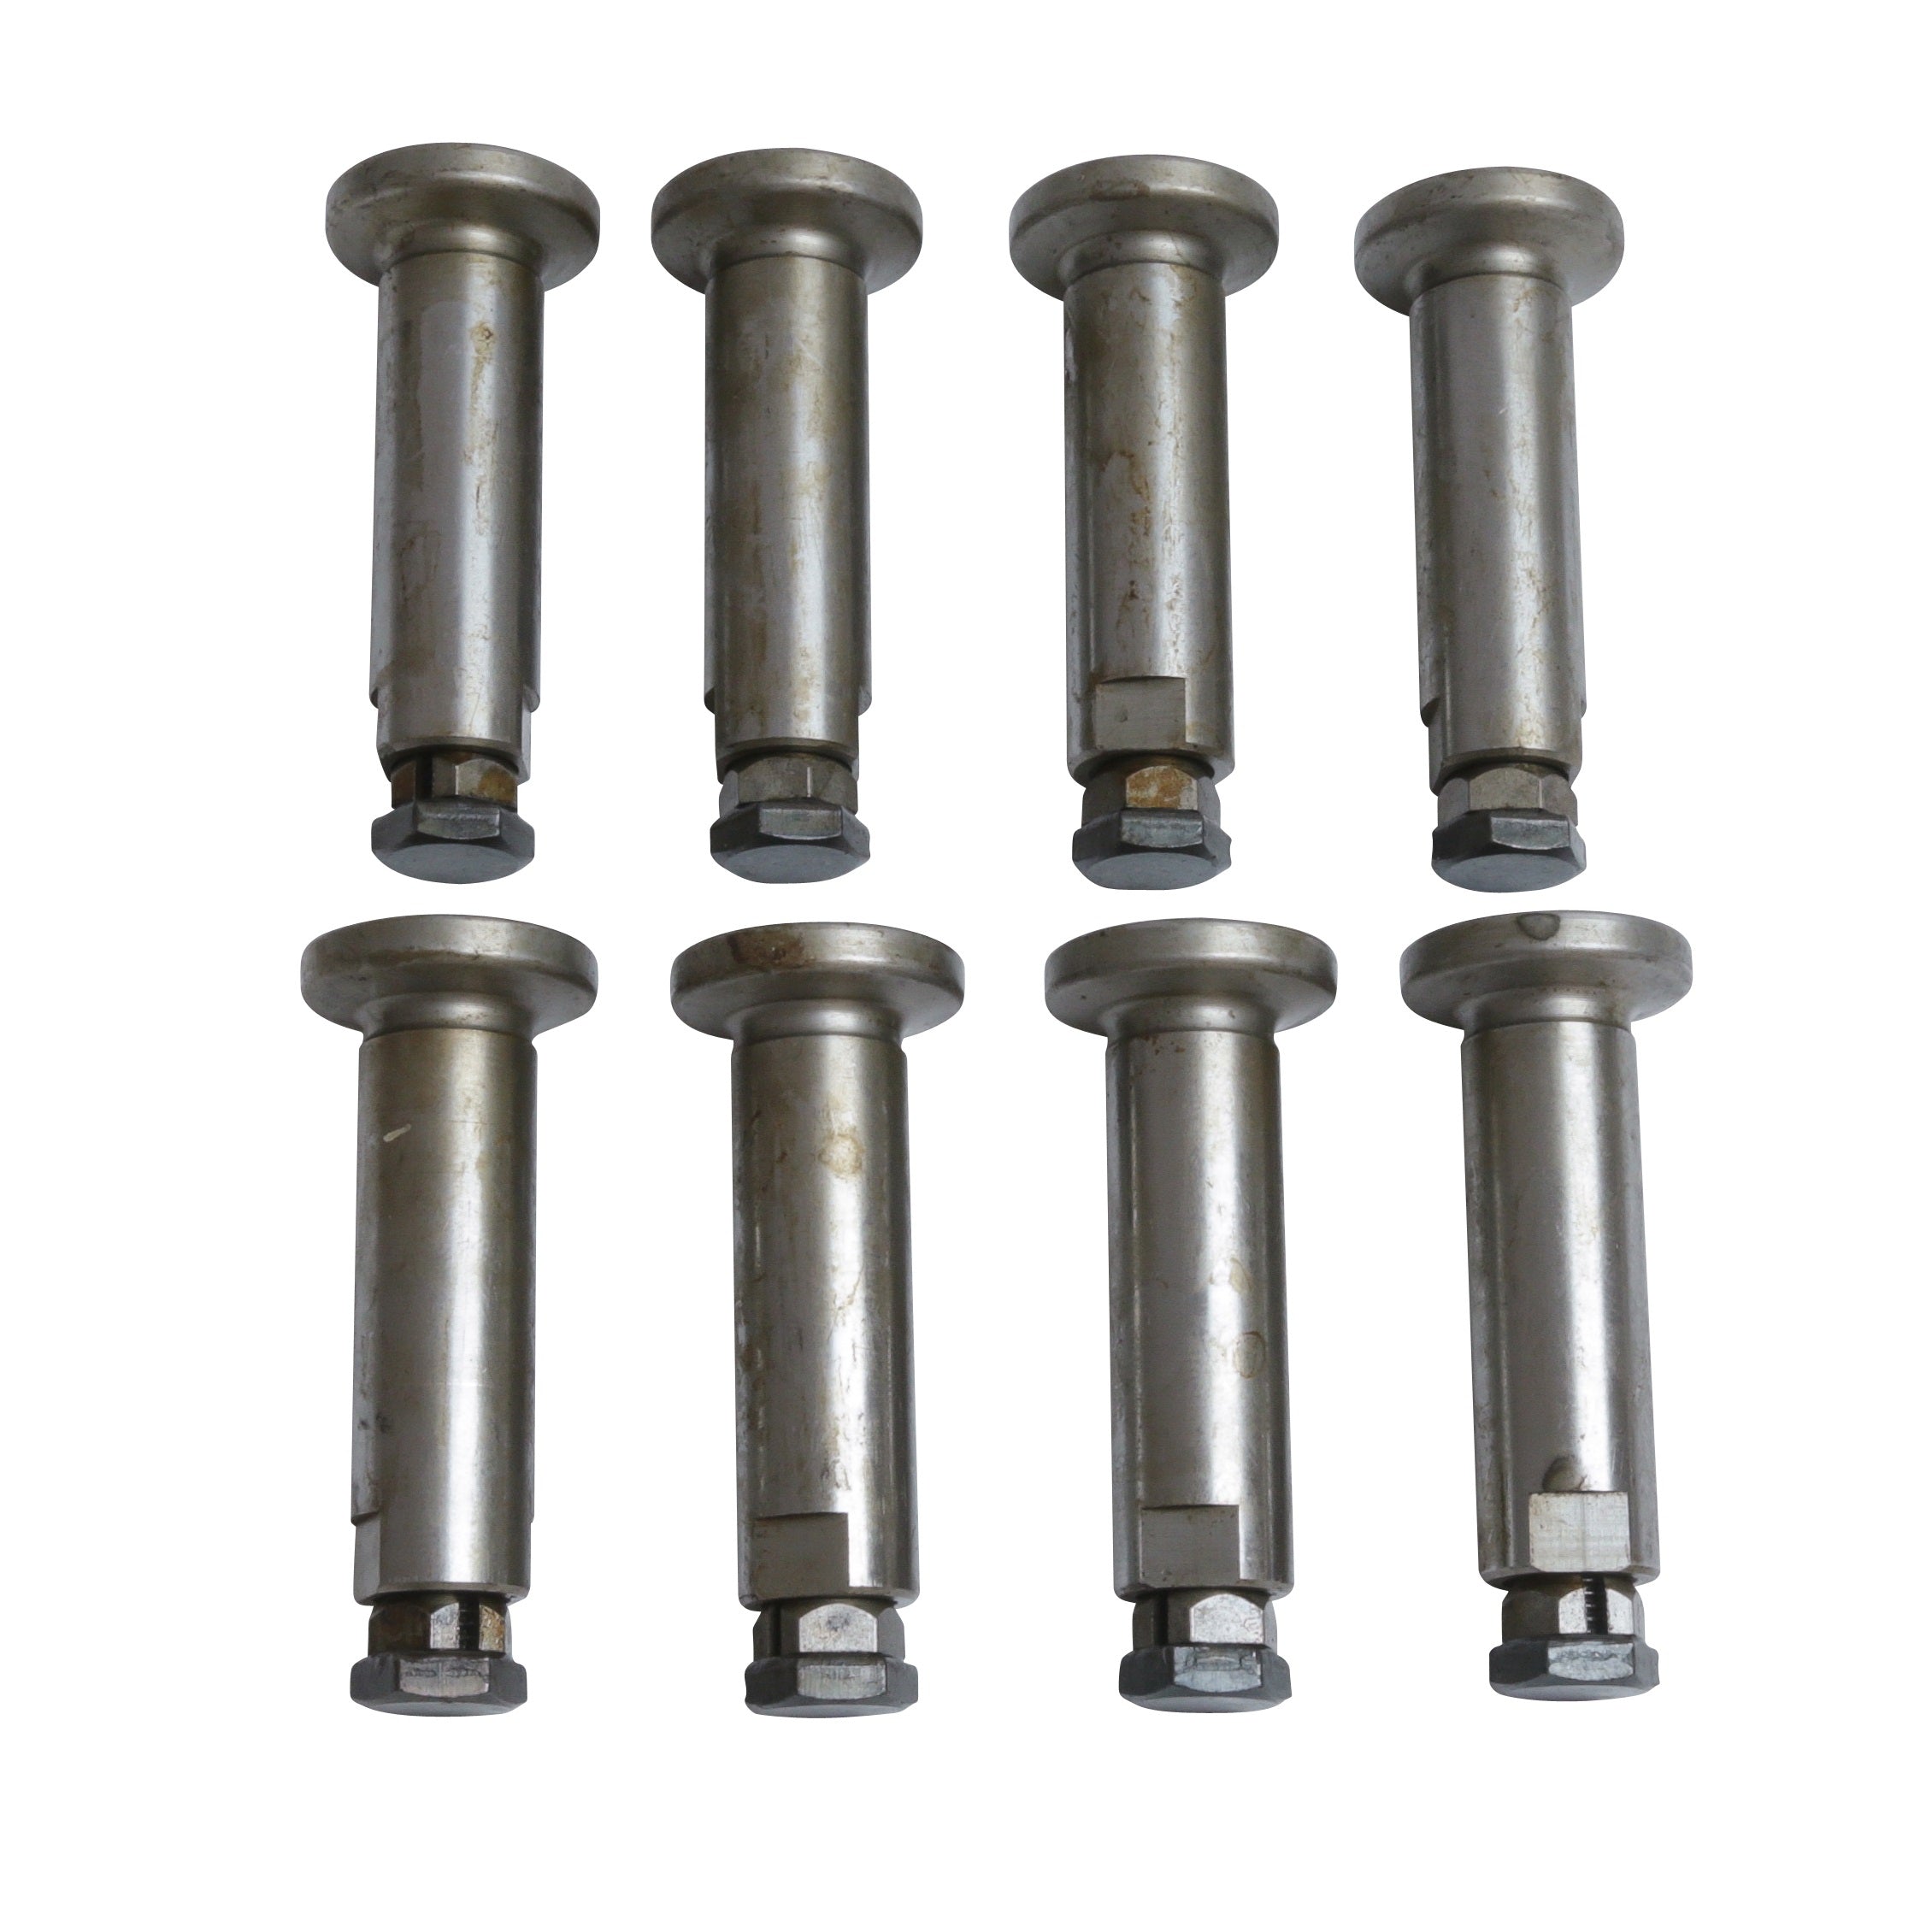 Tappets (Adjustable-Double Lock) • 1932-34 Ford 4 Cylinder